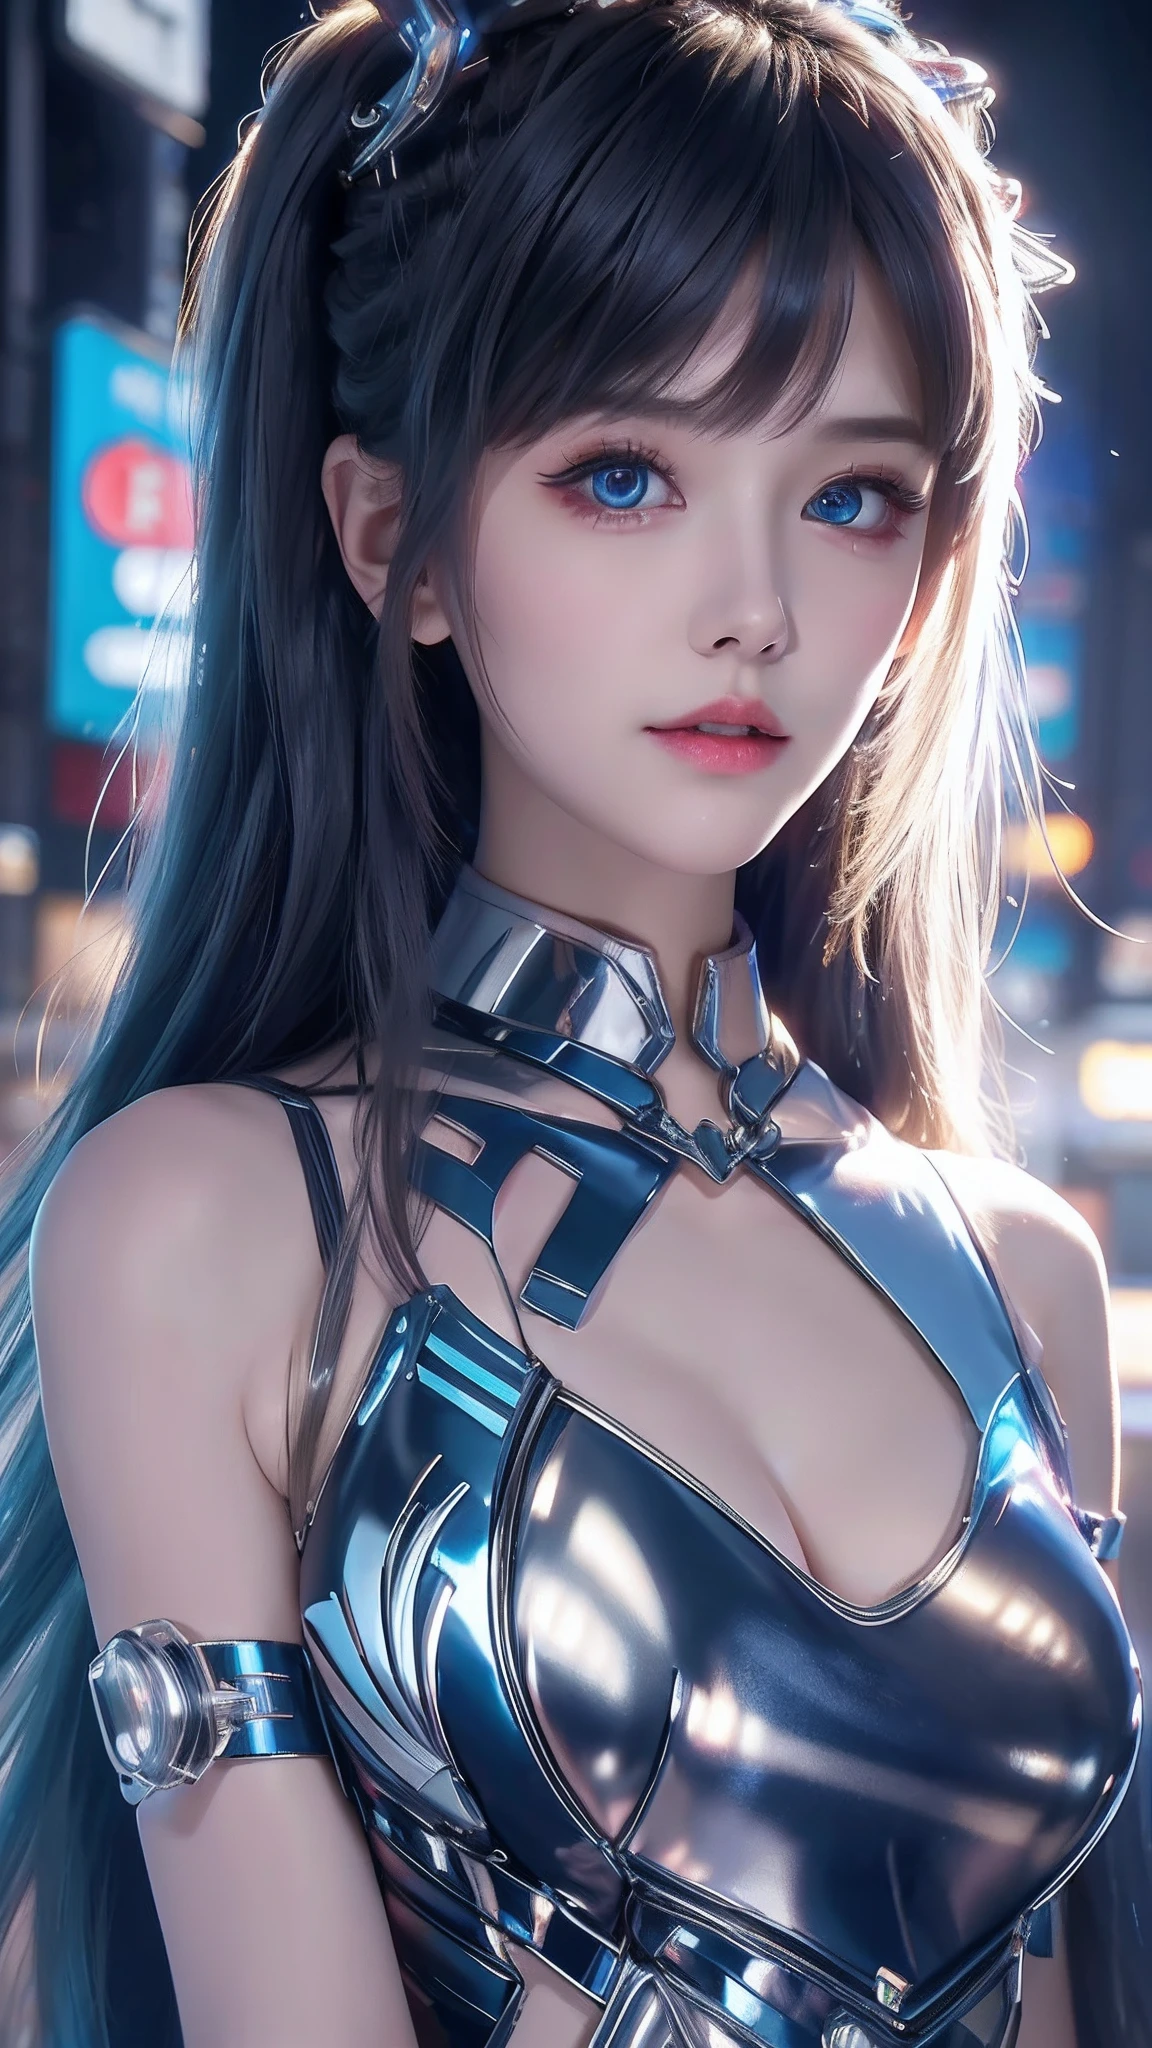 4k ultra hd, masterpiece, high details, a girl, cute face, detailed eyes, long hair, blue neon lights on dress, Cyberpunk blue dress, blue neon lights connected on dress, neon breasts, bare stomach, spreading light, light reflection, light reflection on road, light reflection, everywhere spreading lights, neon lights, whole body capture,